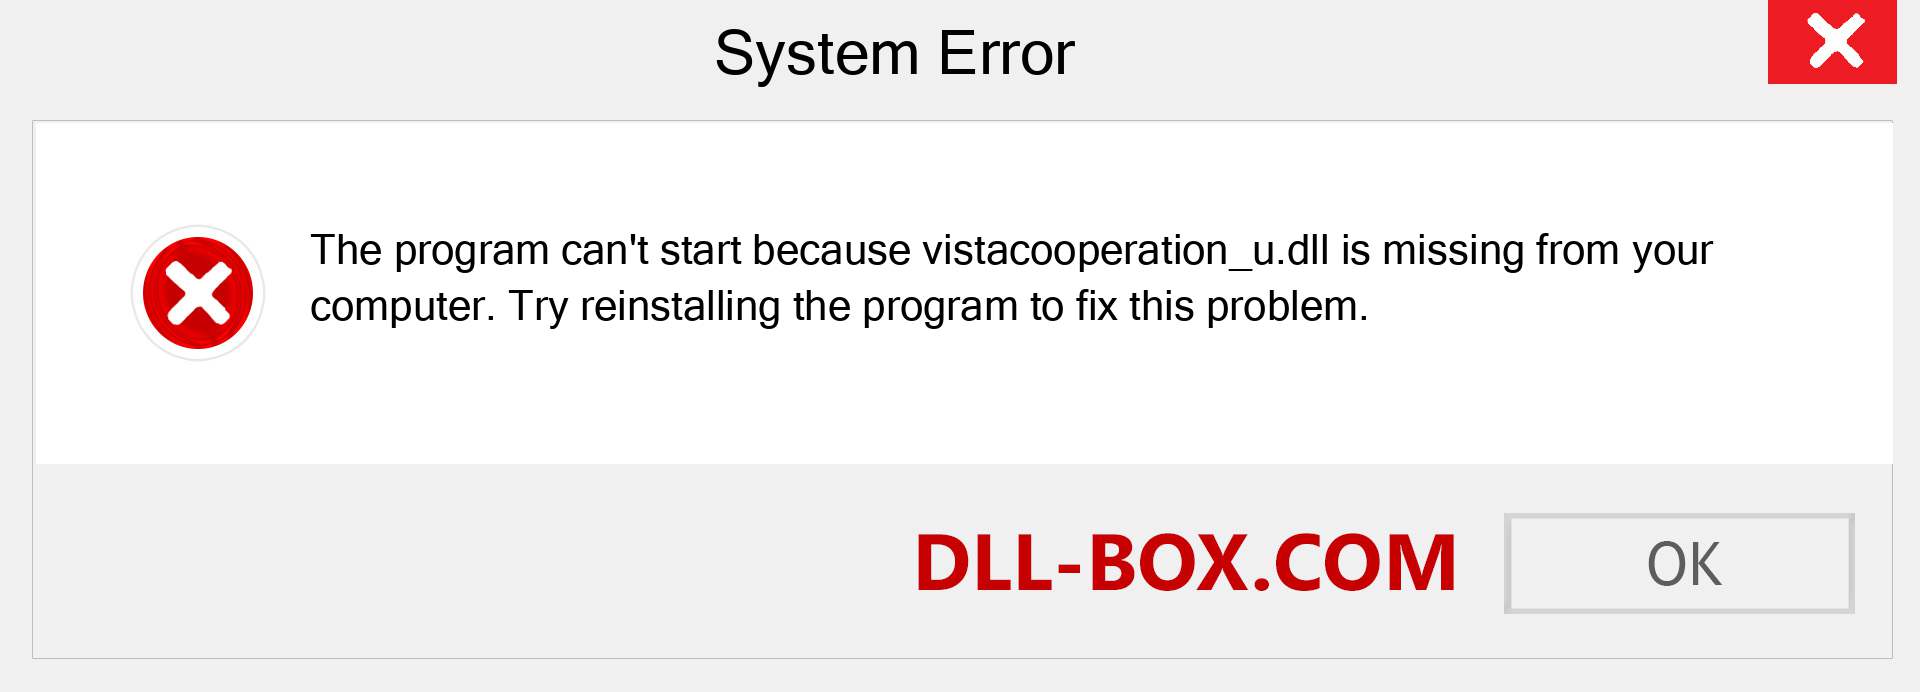  vistacooperation_u.dll file is missing?. Download for Windows 7, 8, 10 - Fix  vistacooperation_u dll Missing Error on Windows, photos, images